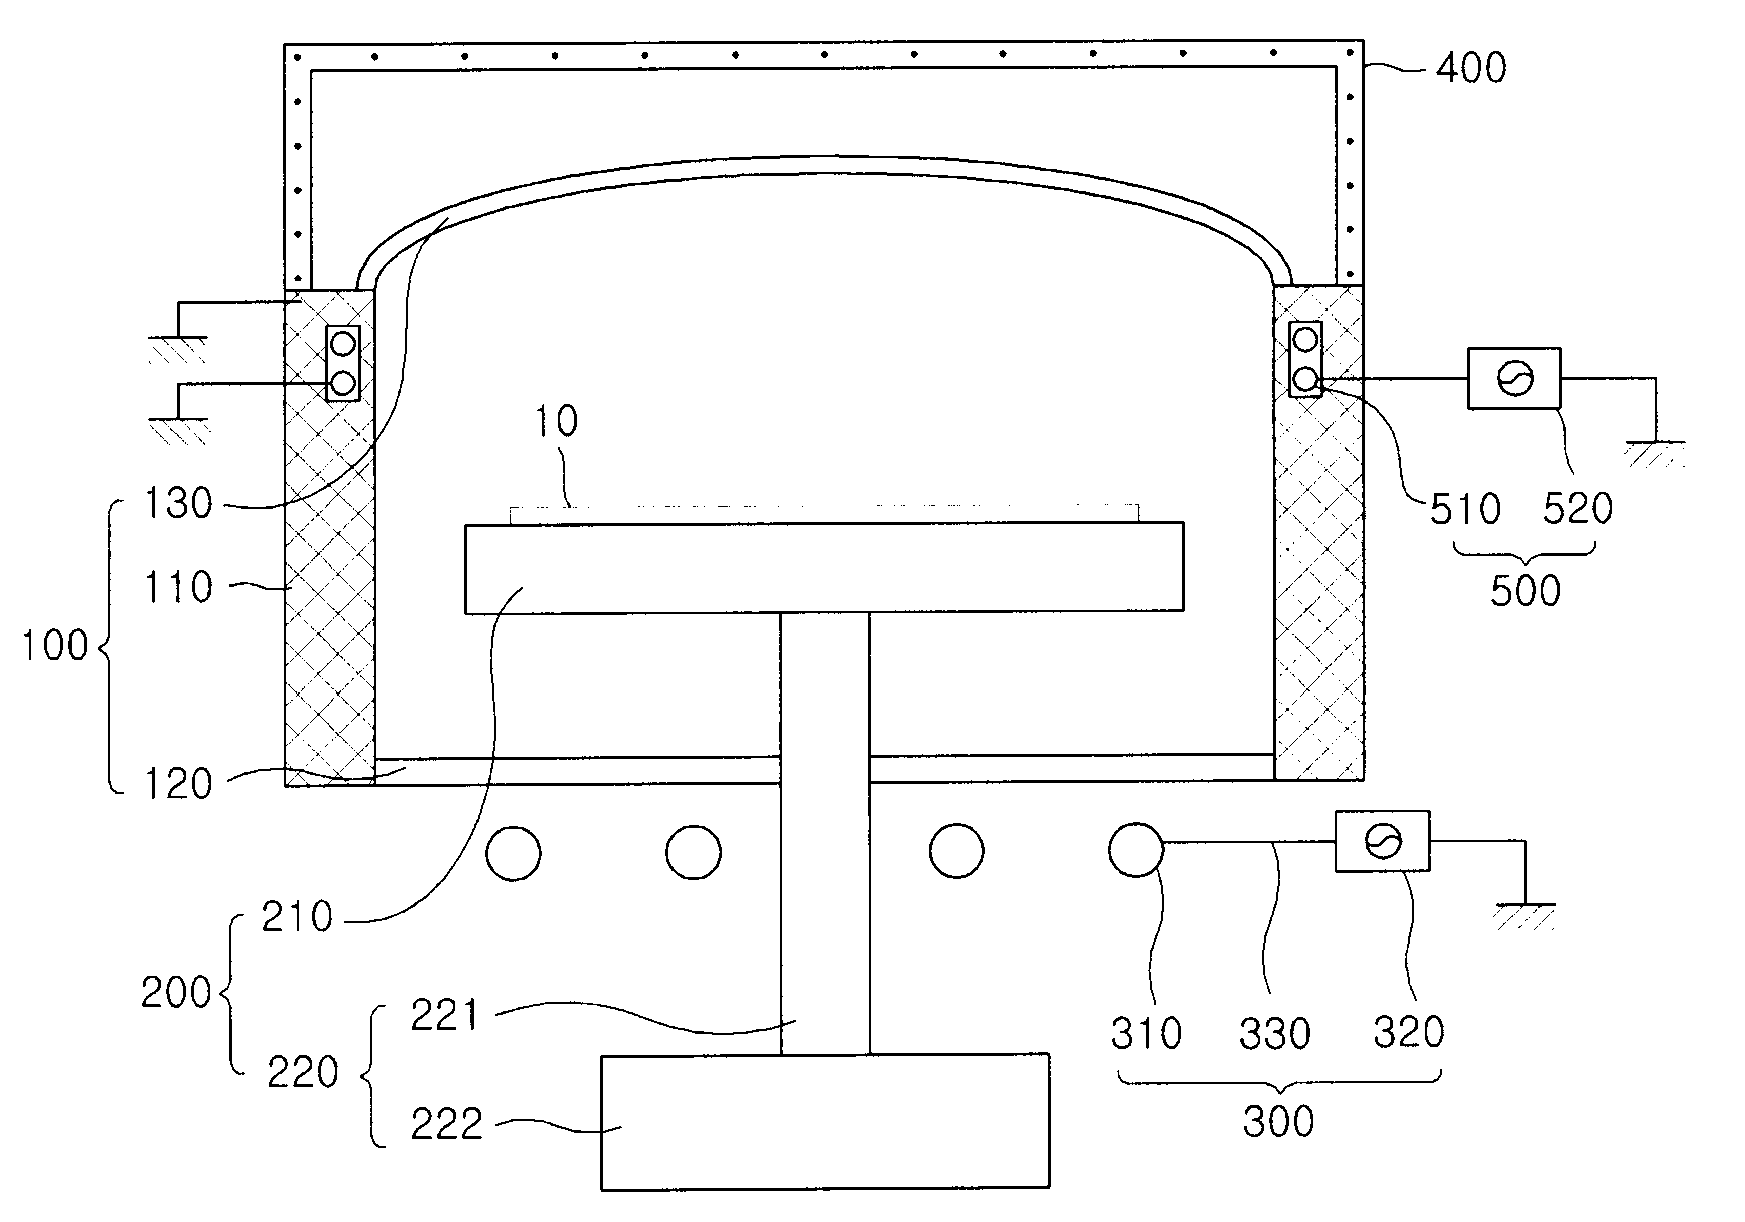 Apparatus for manufacturing semiconductor